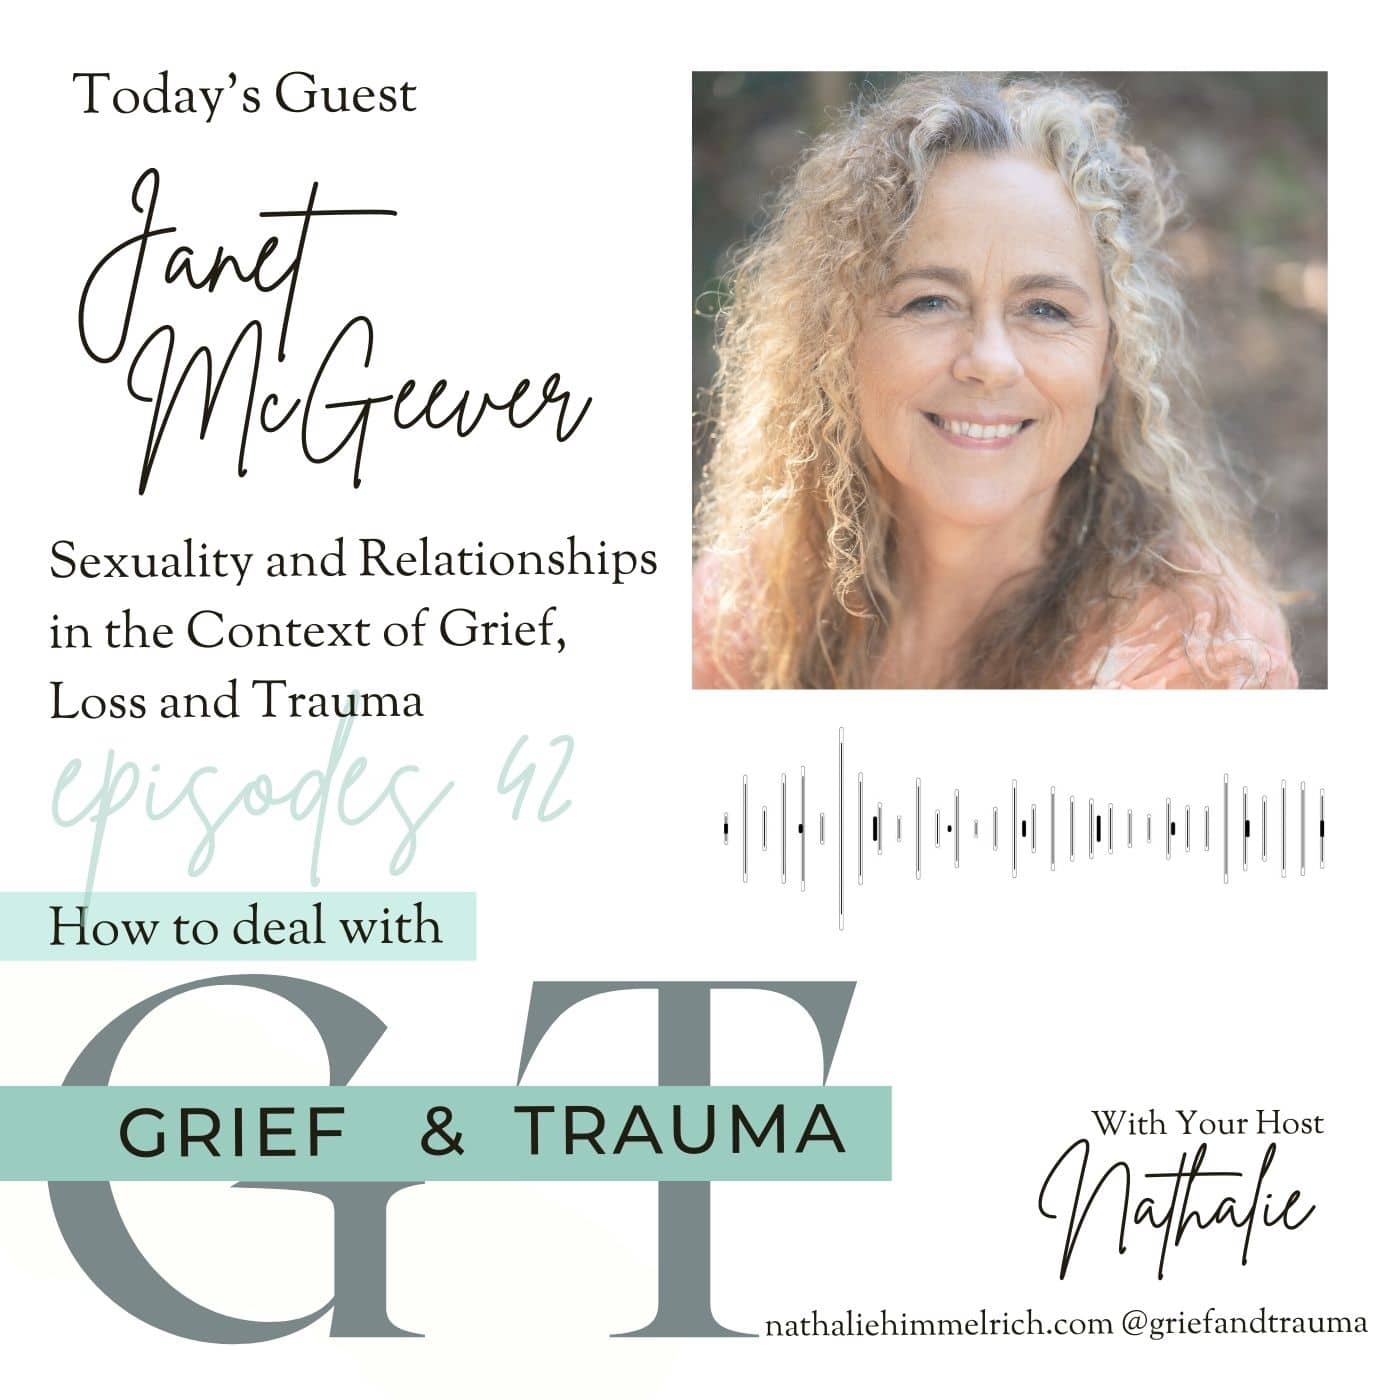 Janet McGeever on Sexuality and Relationships in the Context of Grief, Loss and Trauma | Episode 42